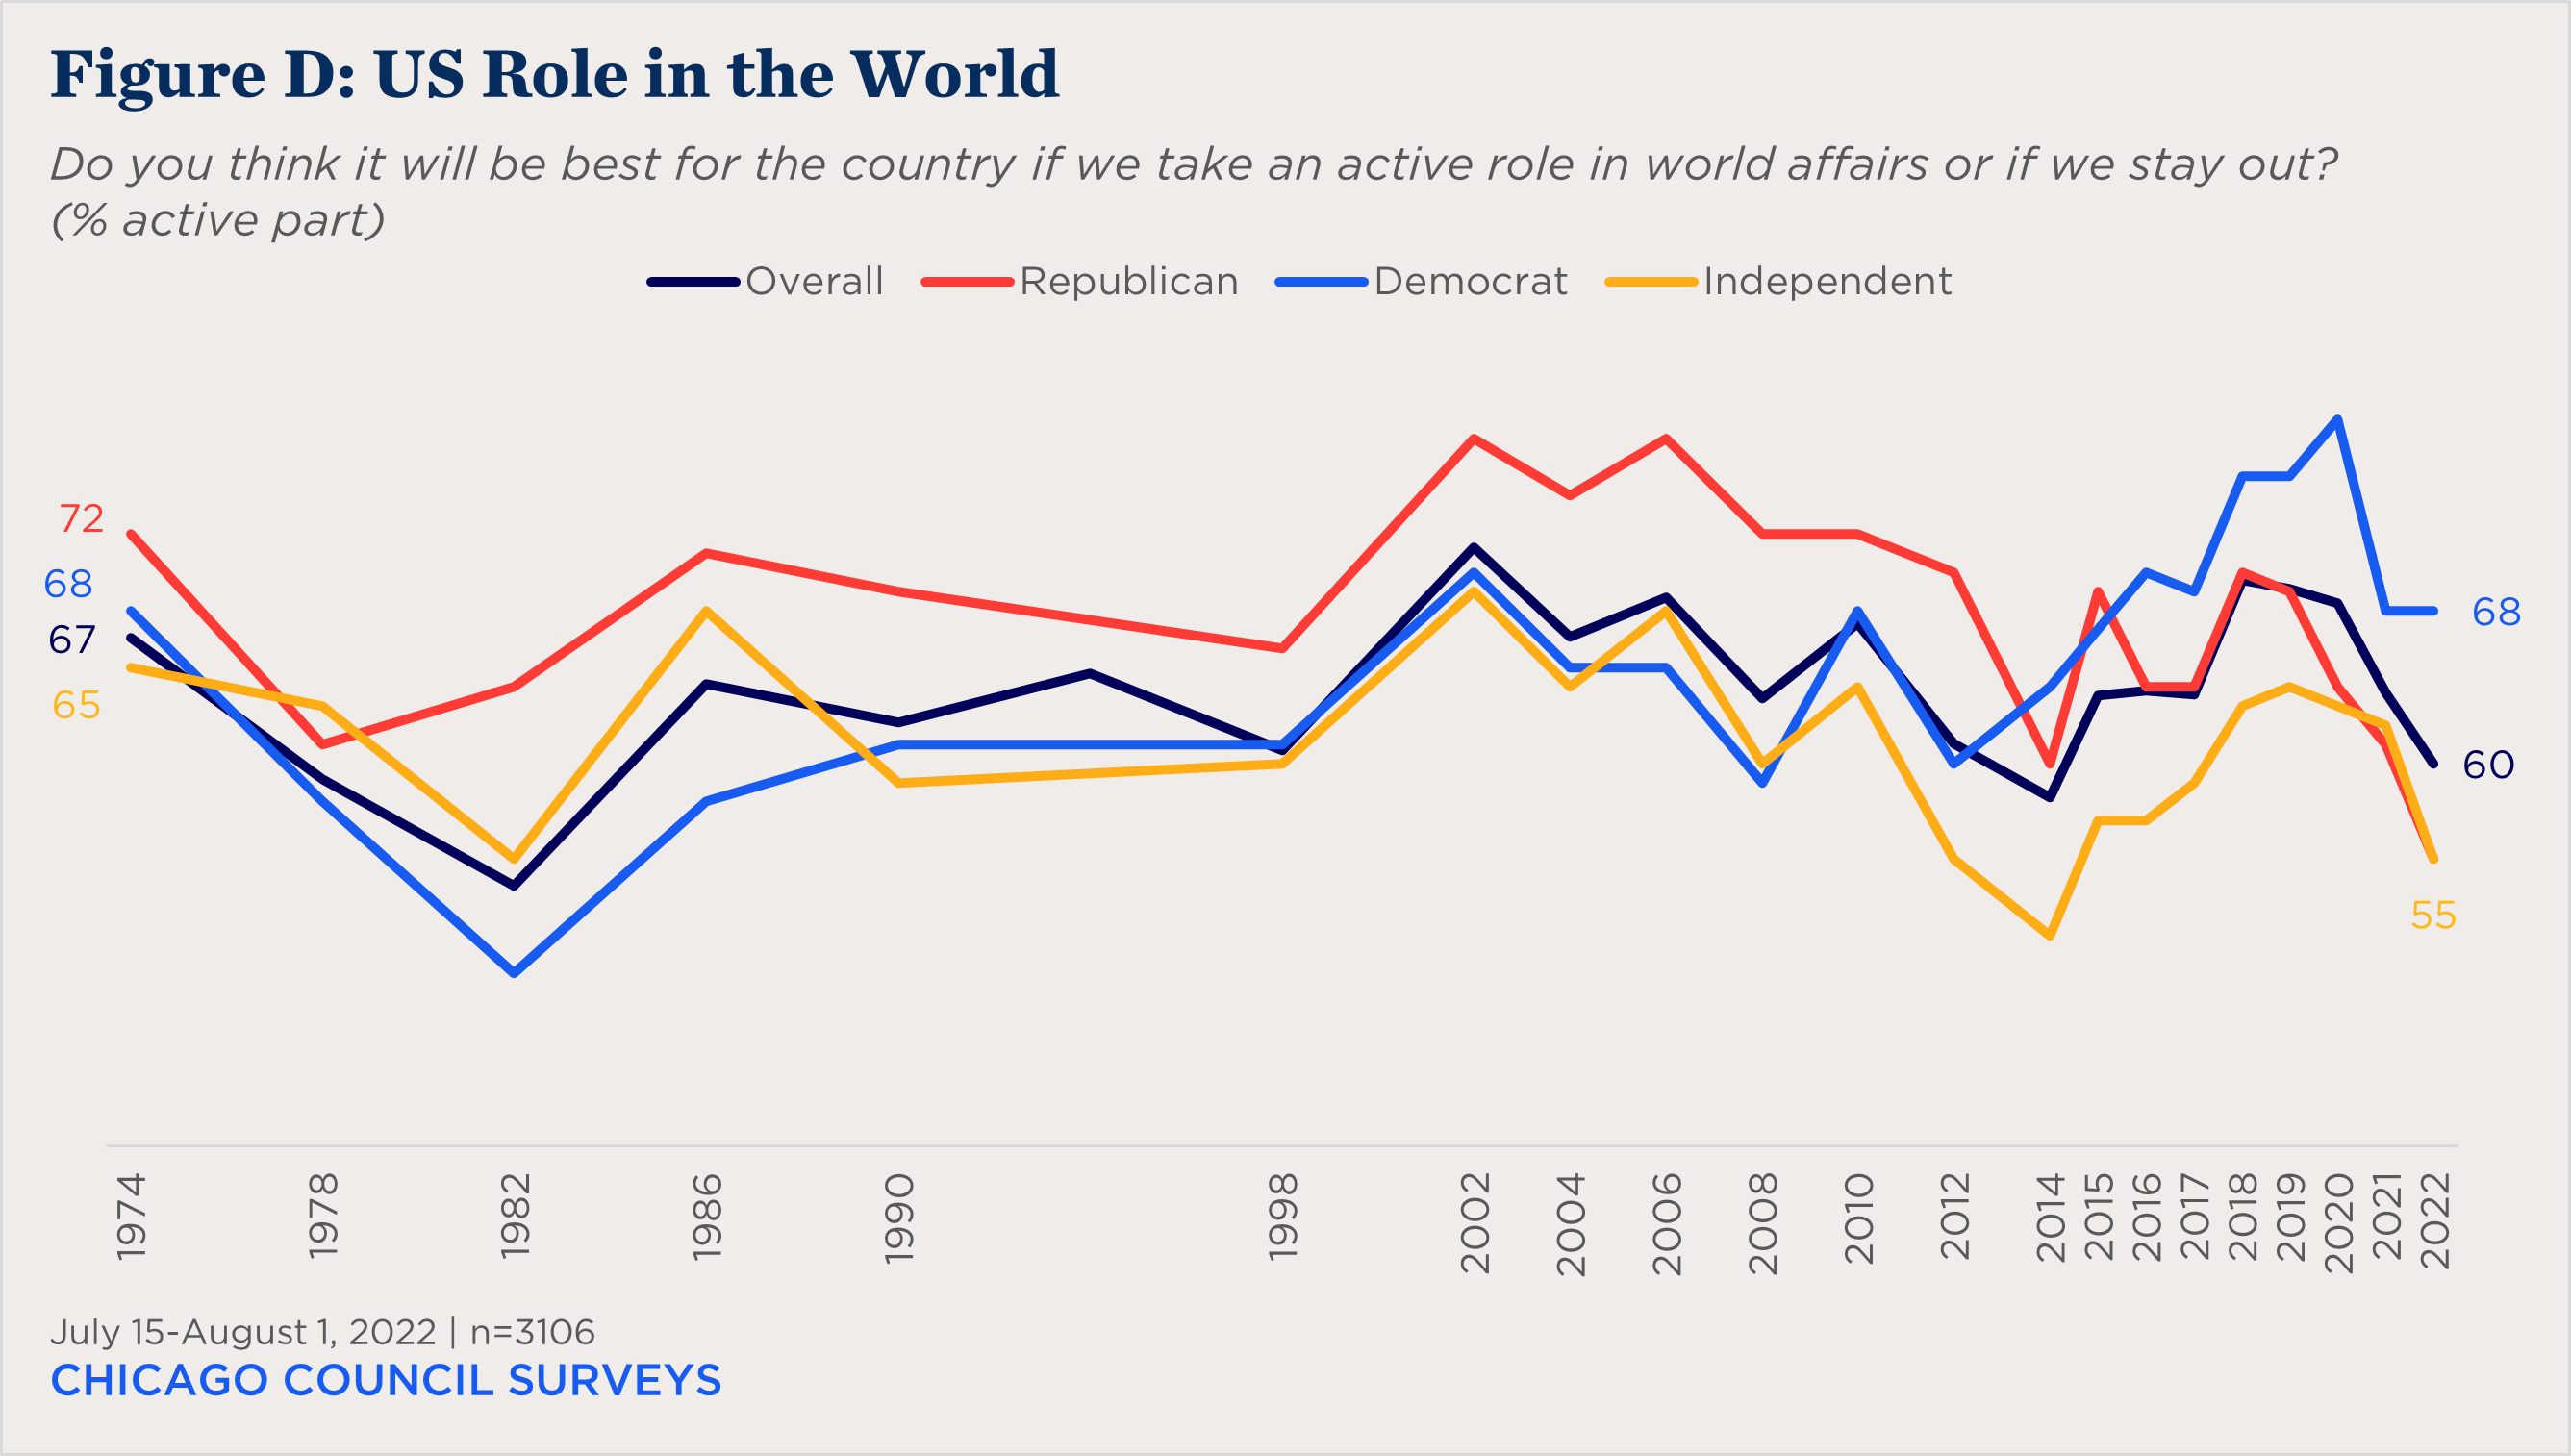 "line chart showing partisan views of US role in the world over time"